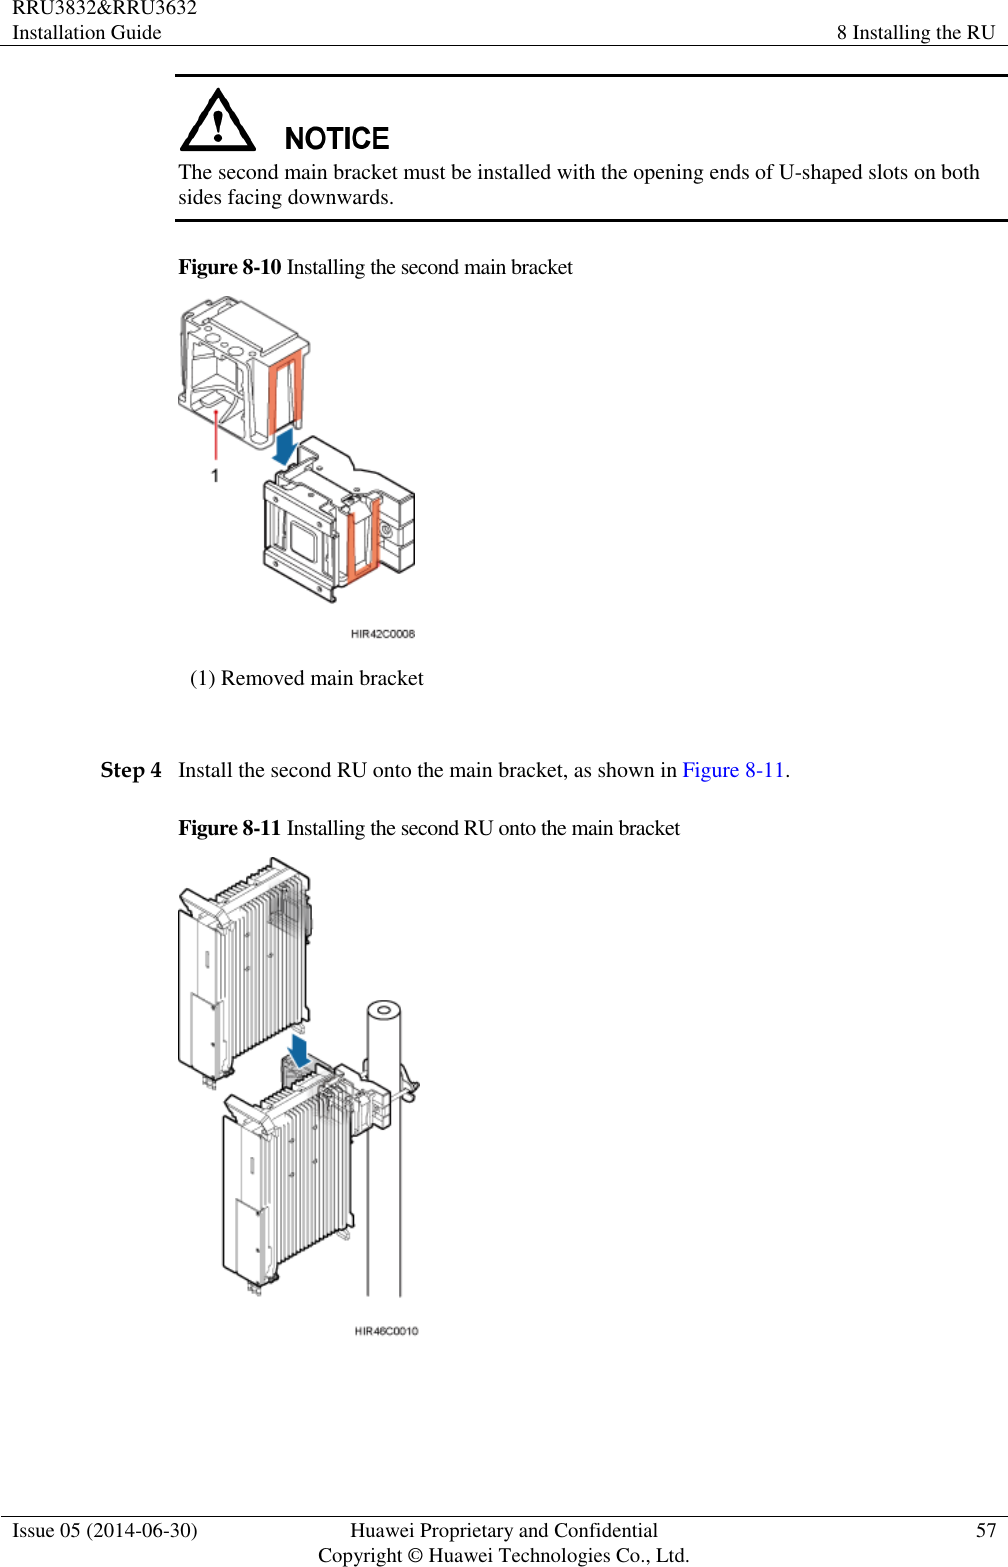 RRU3832&amp;RRU3632 Installation Guide 8 Installing the RU  Issue 05 (2014-06-30) Huawei Proprietary and Confidential                                     Copyright © Huawei Technologies Co., Ltd. 57   The second main bracket must be installed with the opening ends of U-shaped slots on both sides facing downwards. Figure 8-10 Installing the second main bracket  (1) Removed main bracket  Step 4 Install the second RU onto the main bracket, as shown in Figure 8-11. Figure 8-11 Installing the second RU onto the main bracket    